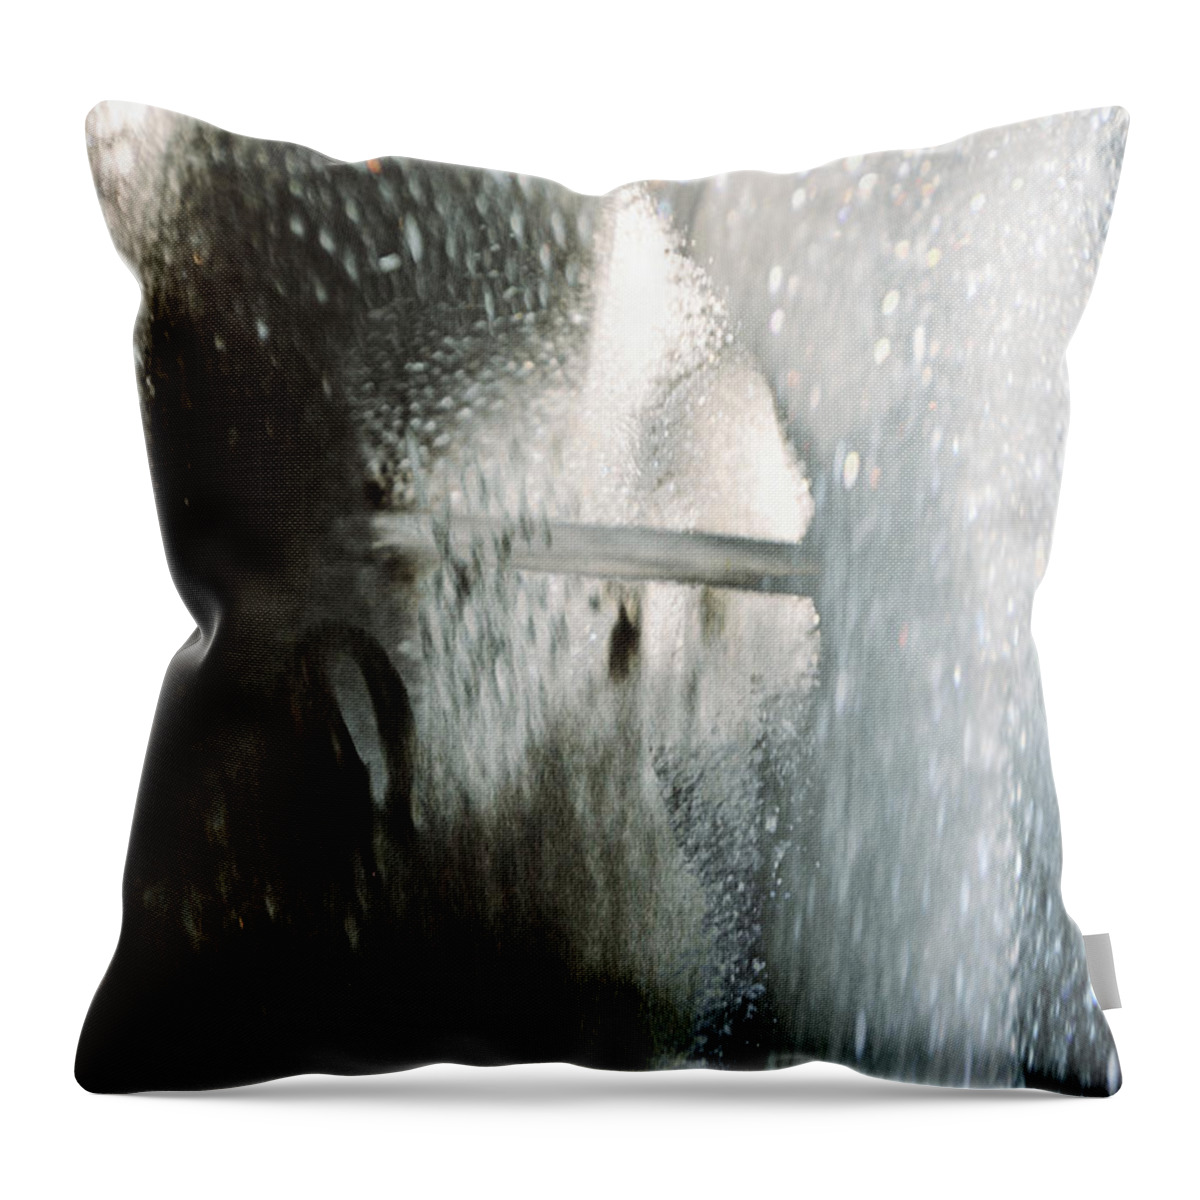 Abstract Throw Pillow featuring the photograph Rain by Gerlinde Keating